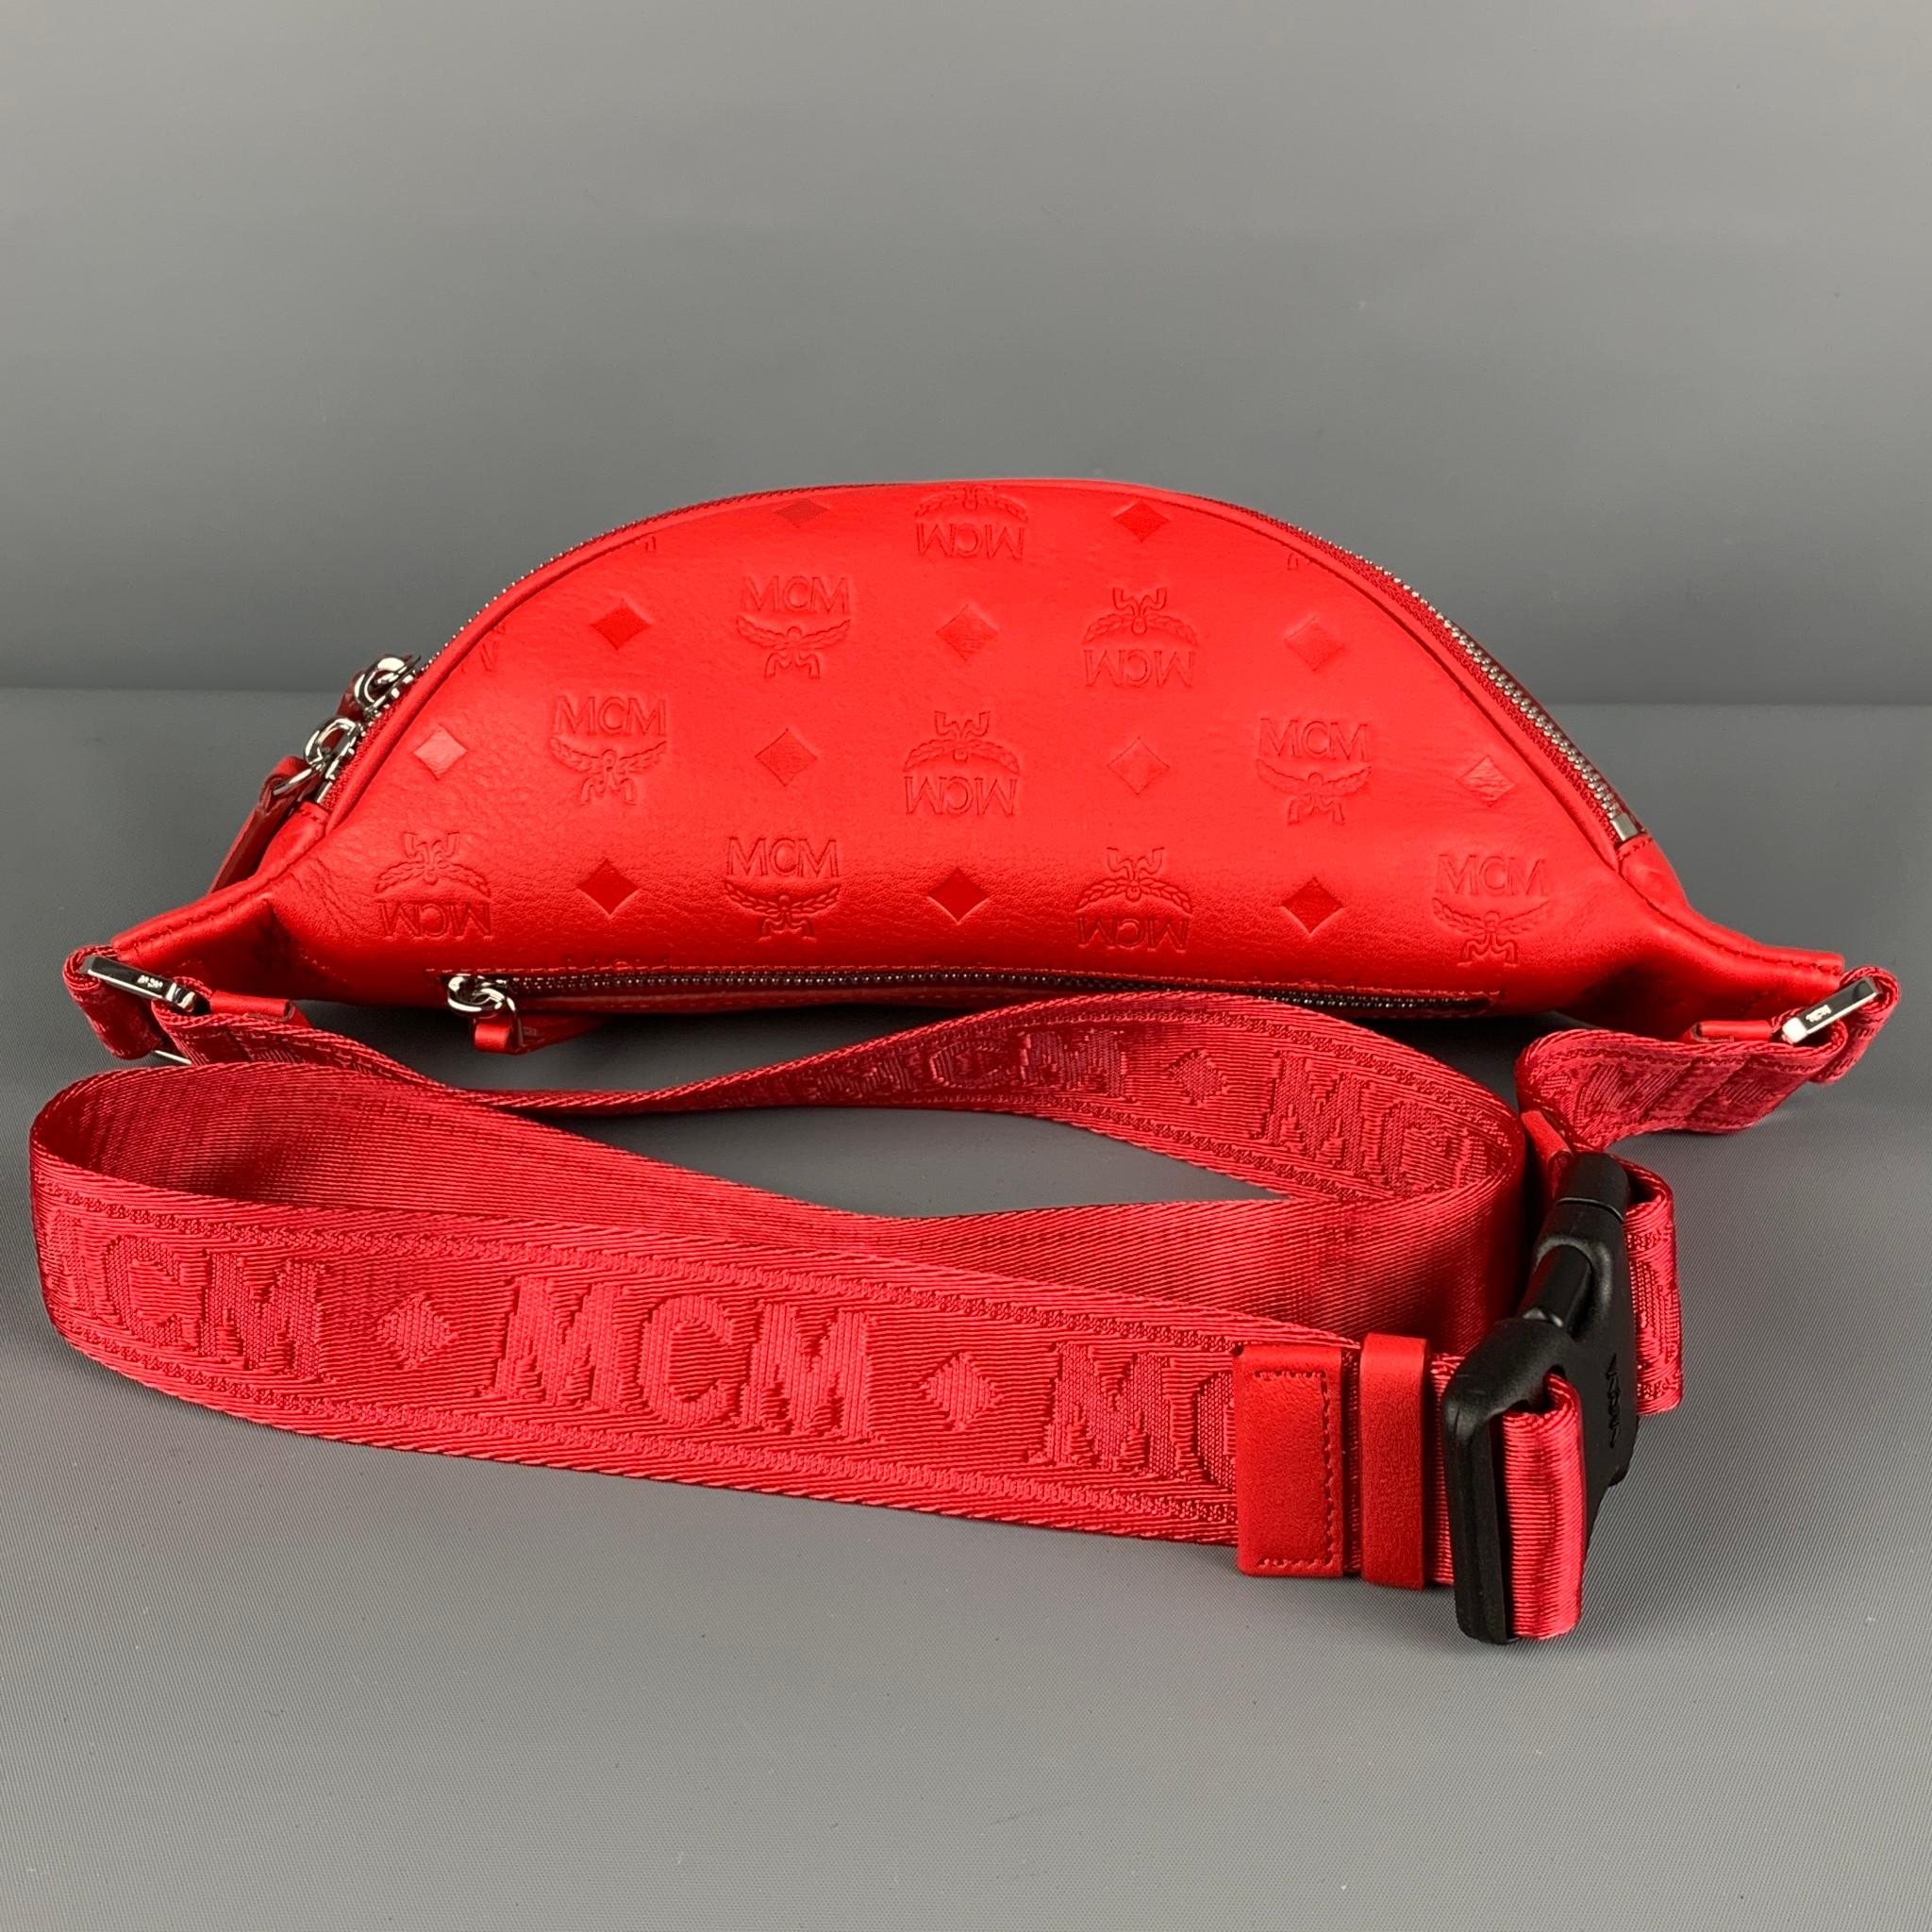 mcm fanny pack red